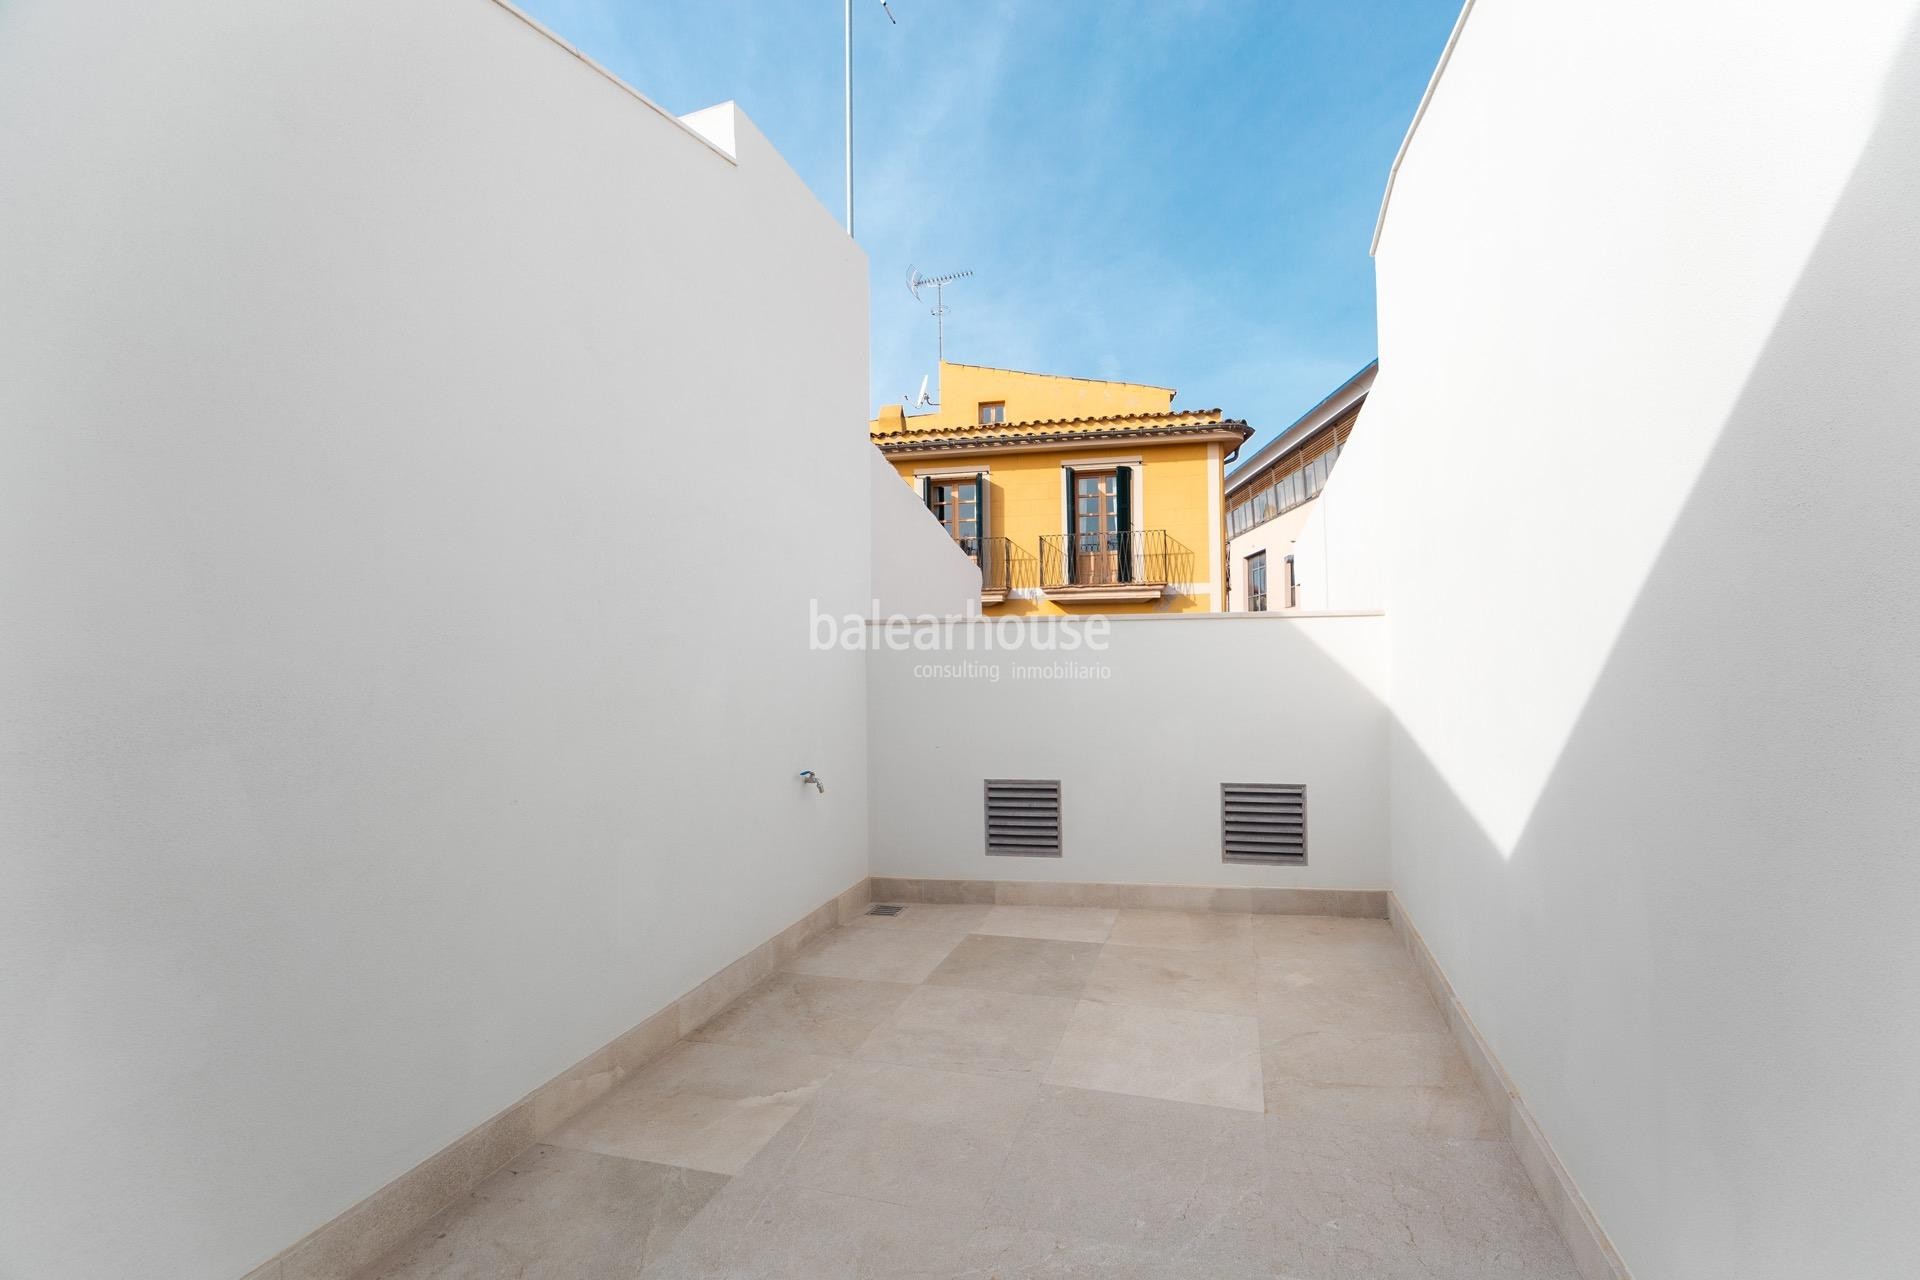 Design and tradition in this exclusive new house in Palma's historic centre